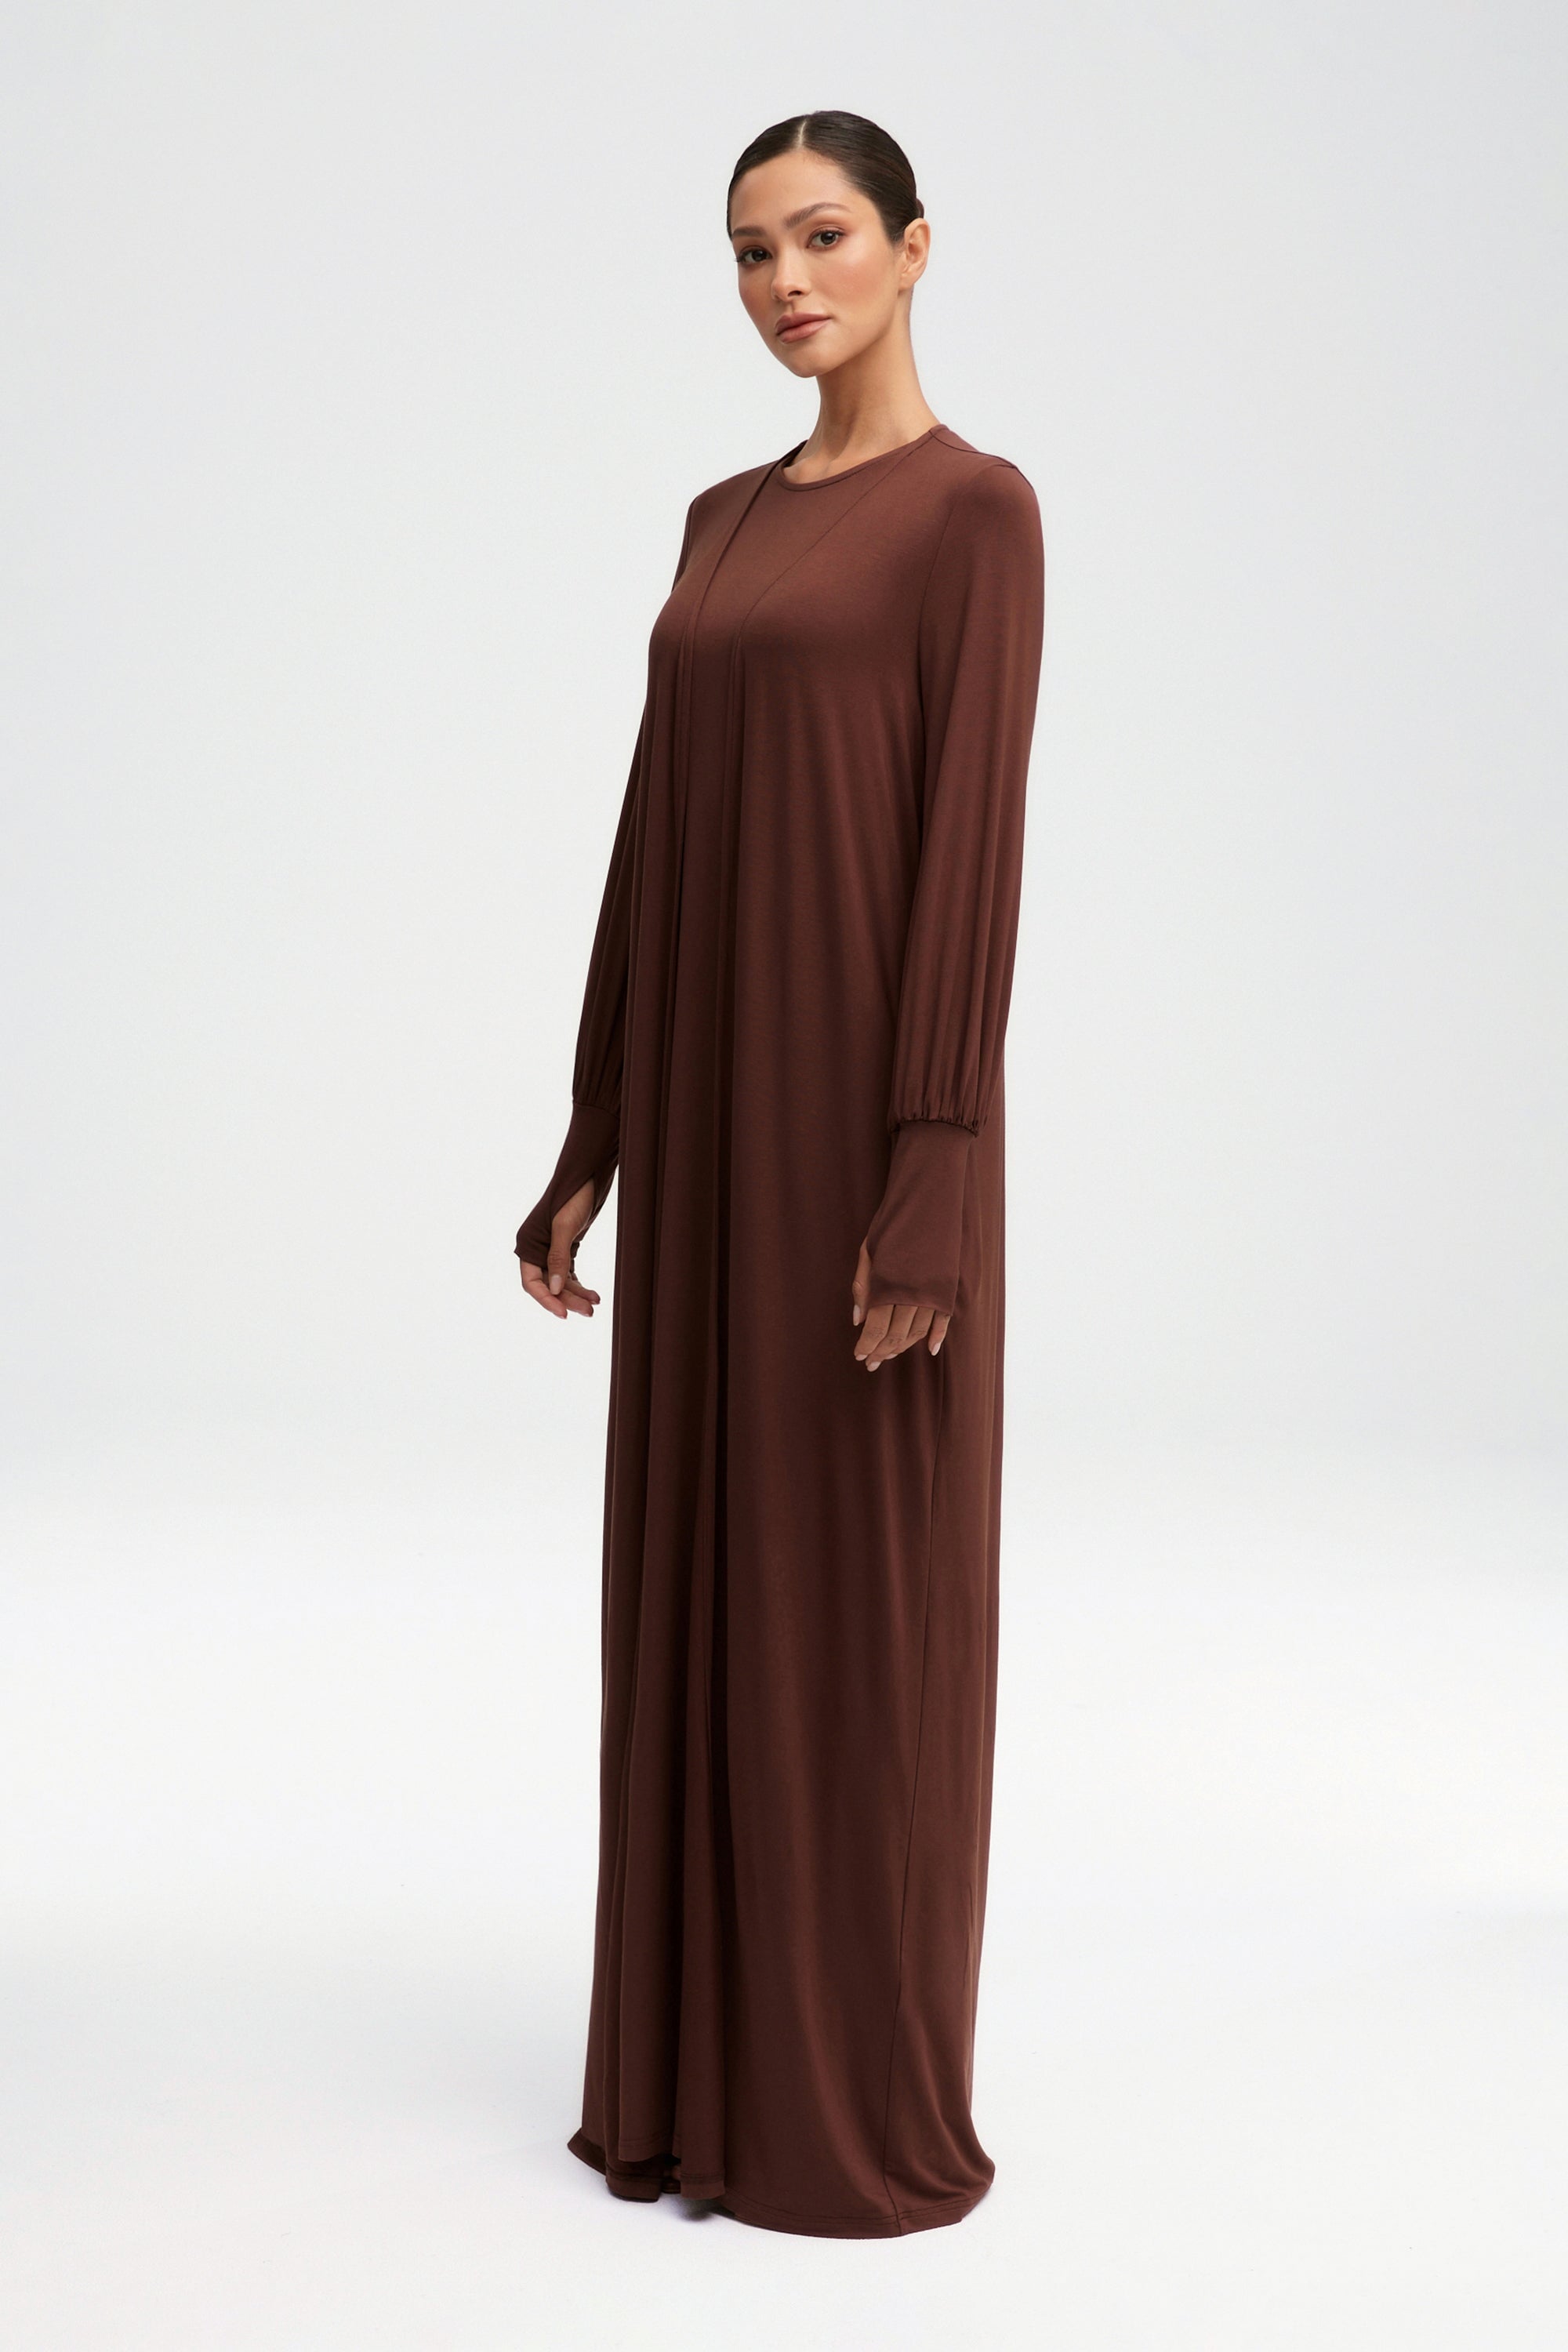 Elegant Unbreakable Split Glass Maxi Dress For Women Deep V Neck, Long  Sleeves, Plus Size, Perfect For Autumn Parties And African Occasions From  Blueberry11, $24.08